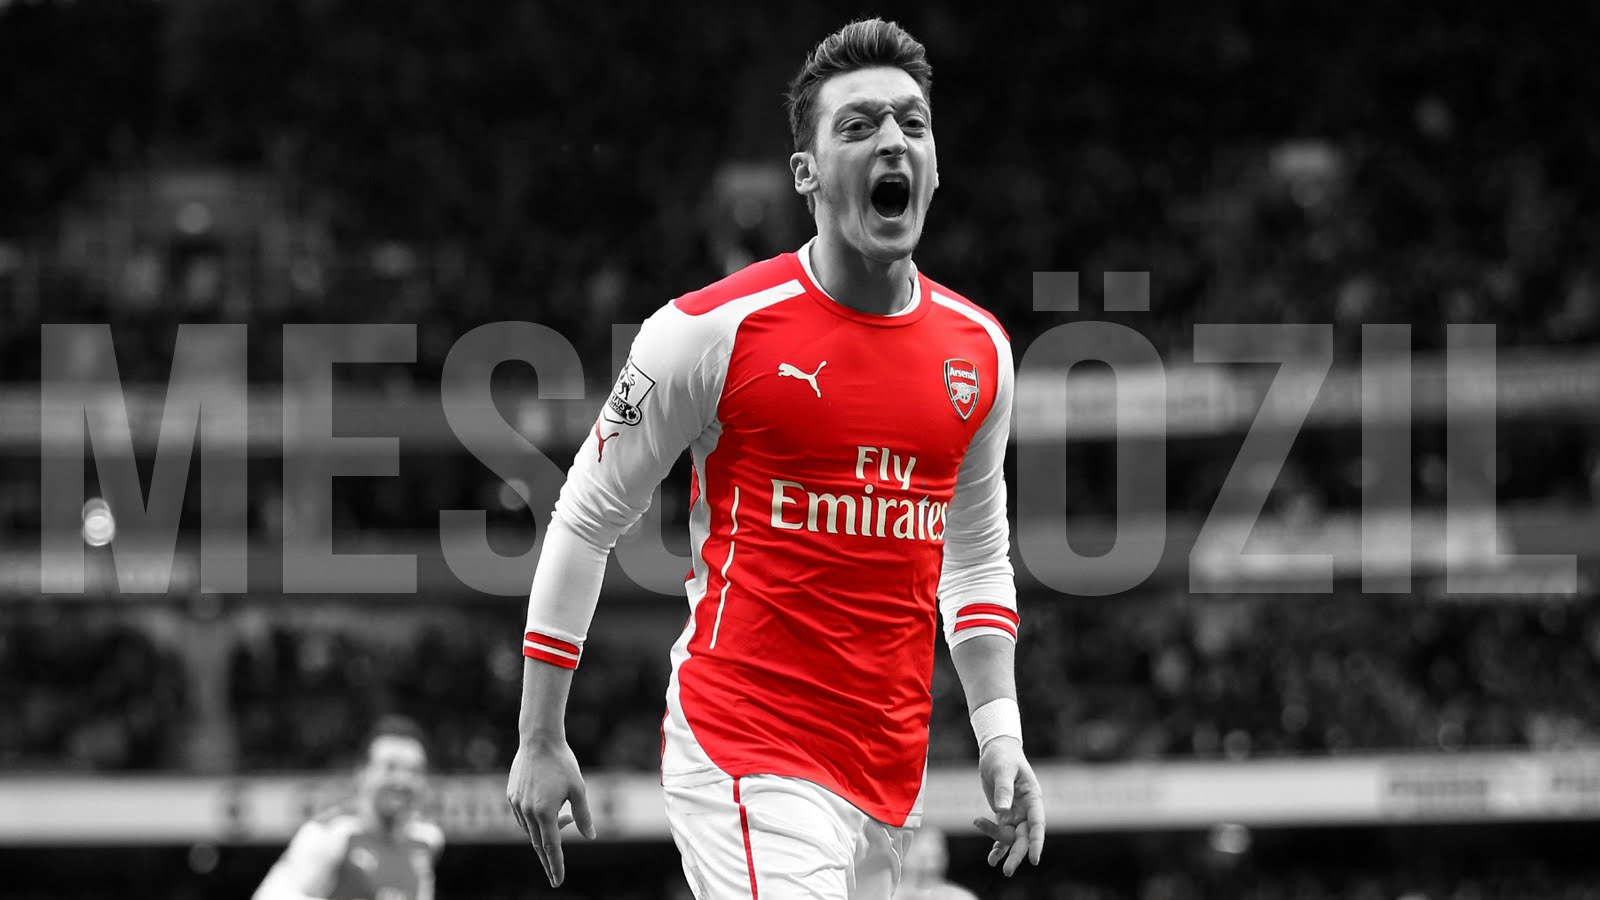 Free download Mesut Ozil Wallpaper High Resolution and Quality Download [1600x900] for your Desktop, Mobile & Tablet. Explore Mesut Ozil Wallpaper. Mesut Ozil Wallpaper, Ozil Wallpaper, Ozil Wallpaper